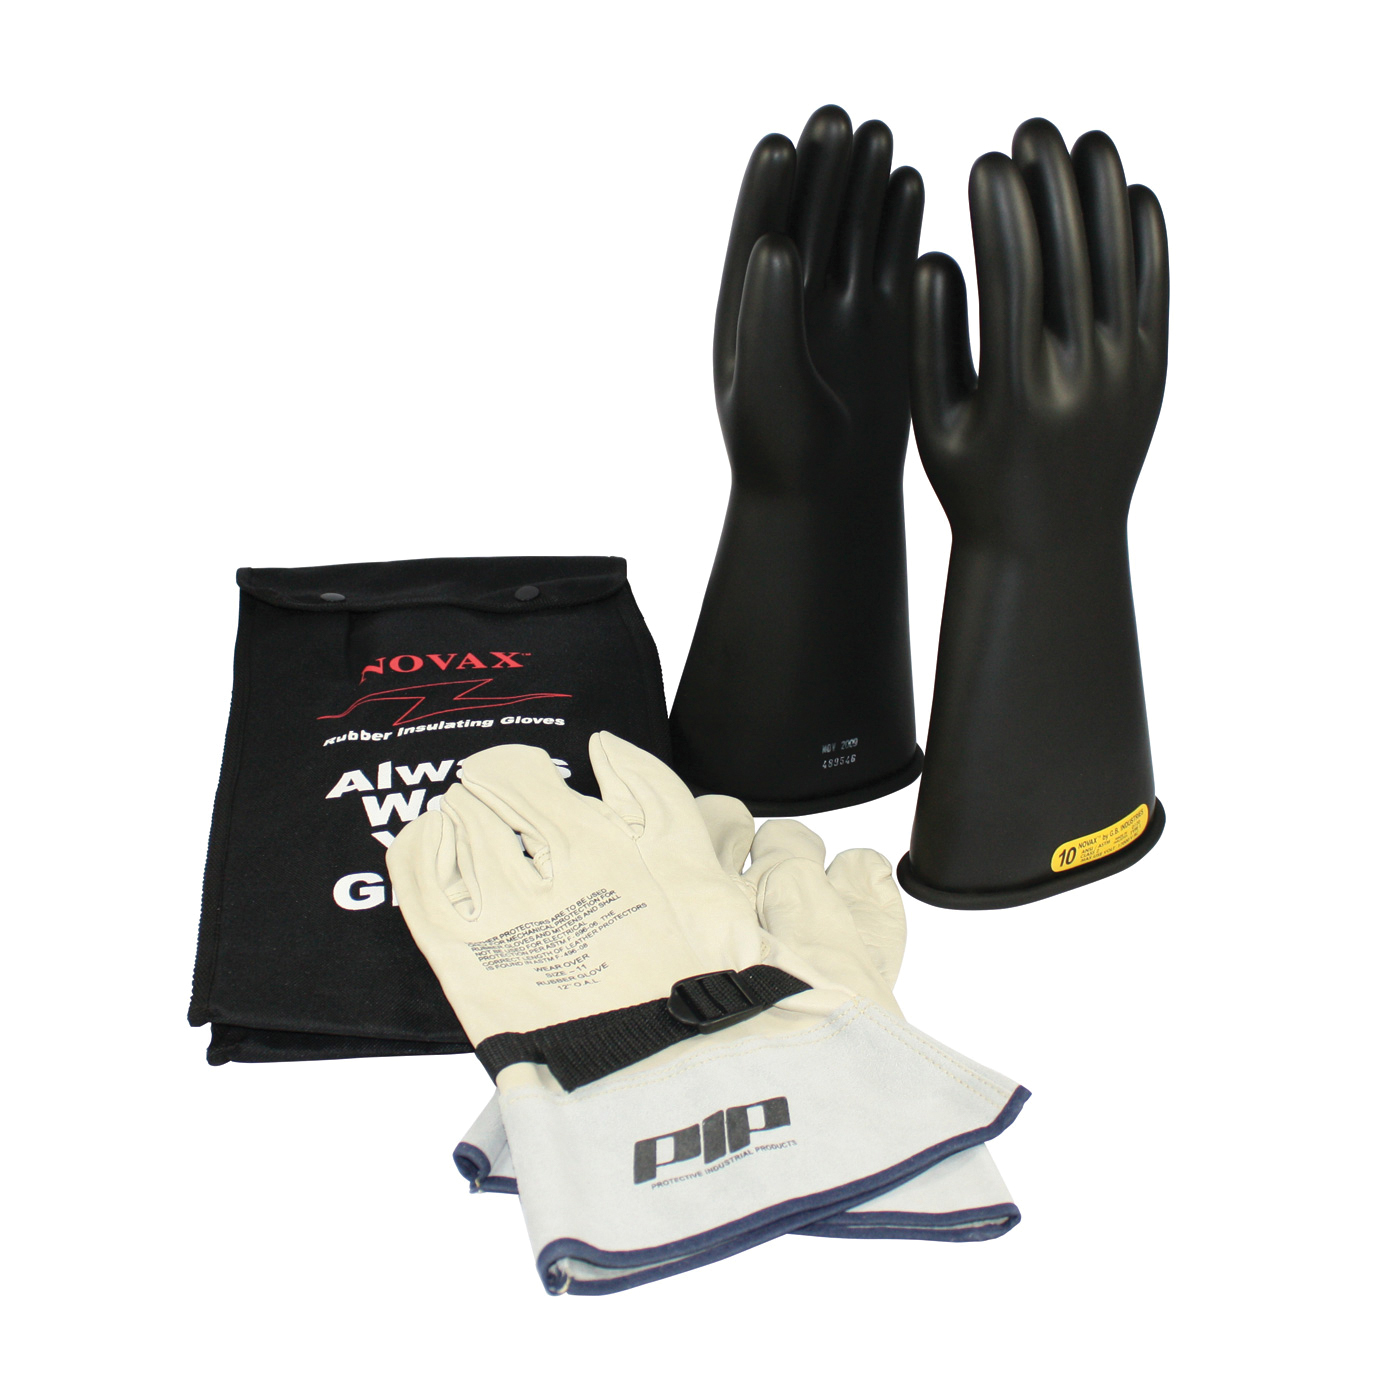 Novax® 150-SK-2/11-KIT Insulating Unisex Electrical Safety Gloves Kit, SZ 11, Cowhide Leather/Natural Rubber, Black/Natural, 14 in L, ASTM Class: Class 2, 17000 VAC, 25500 VDC Max Use Voltage